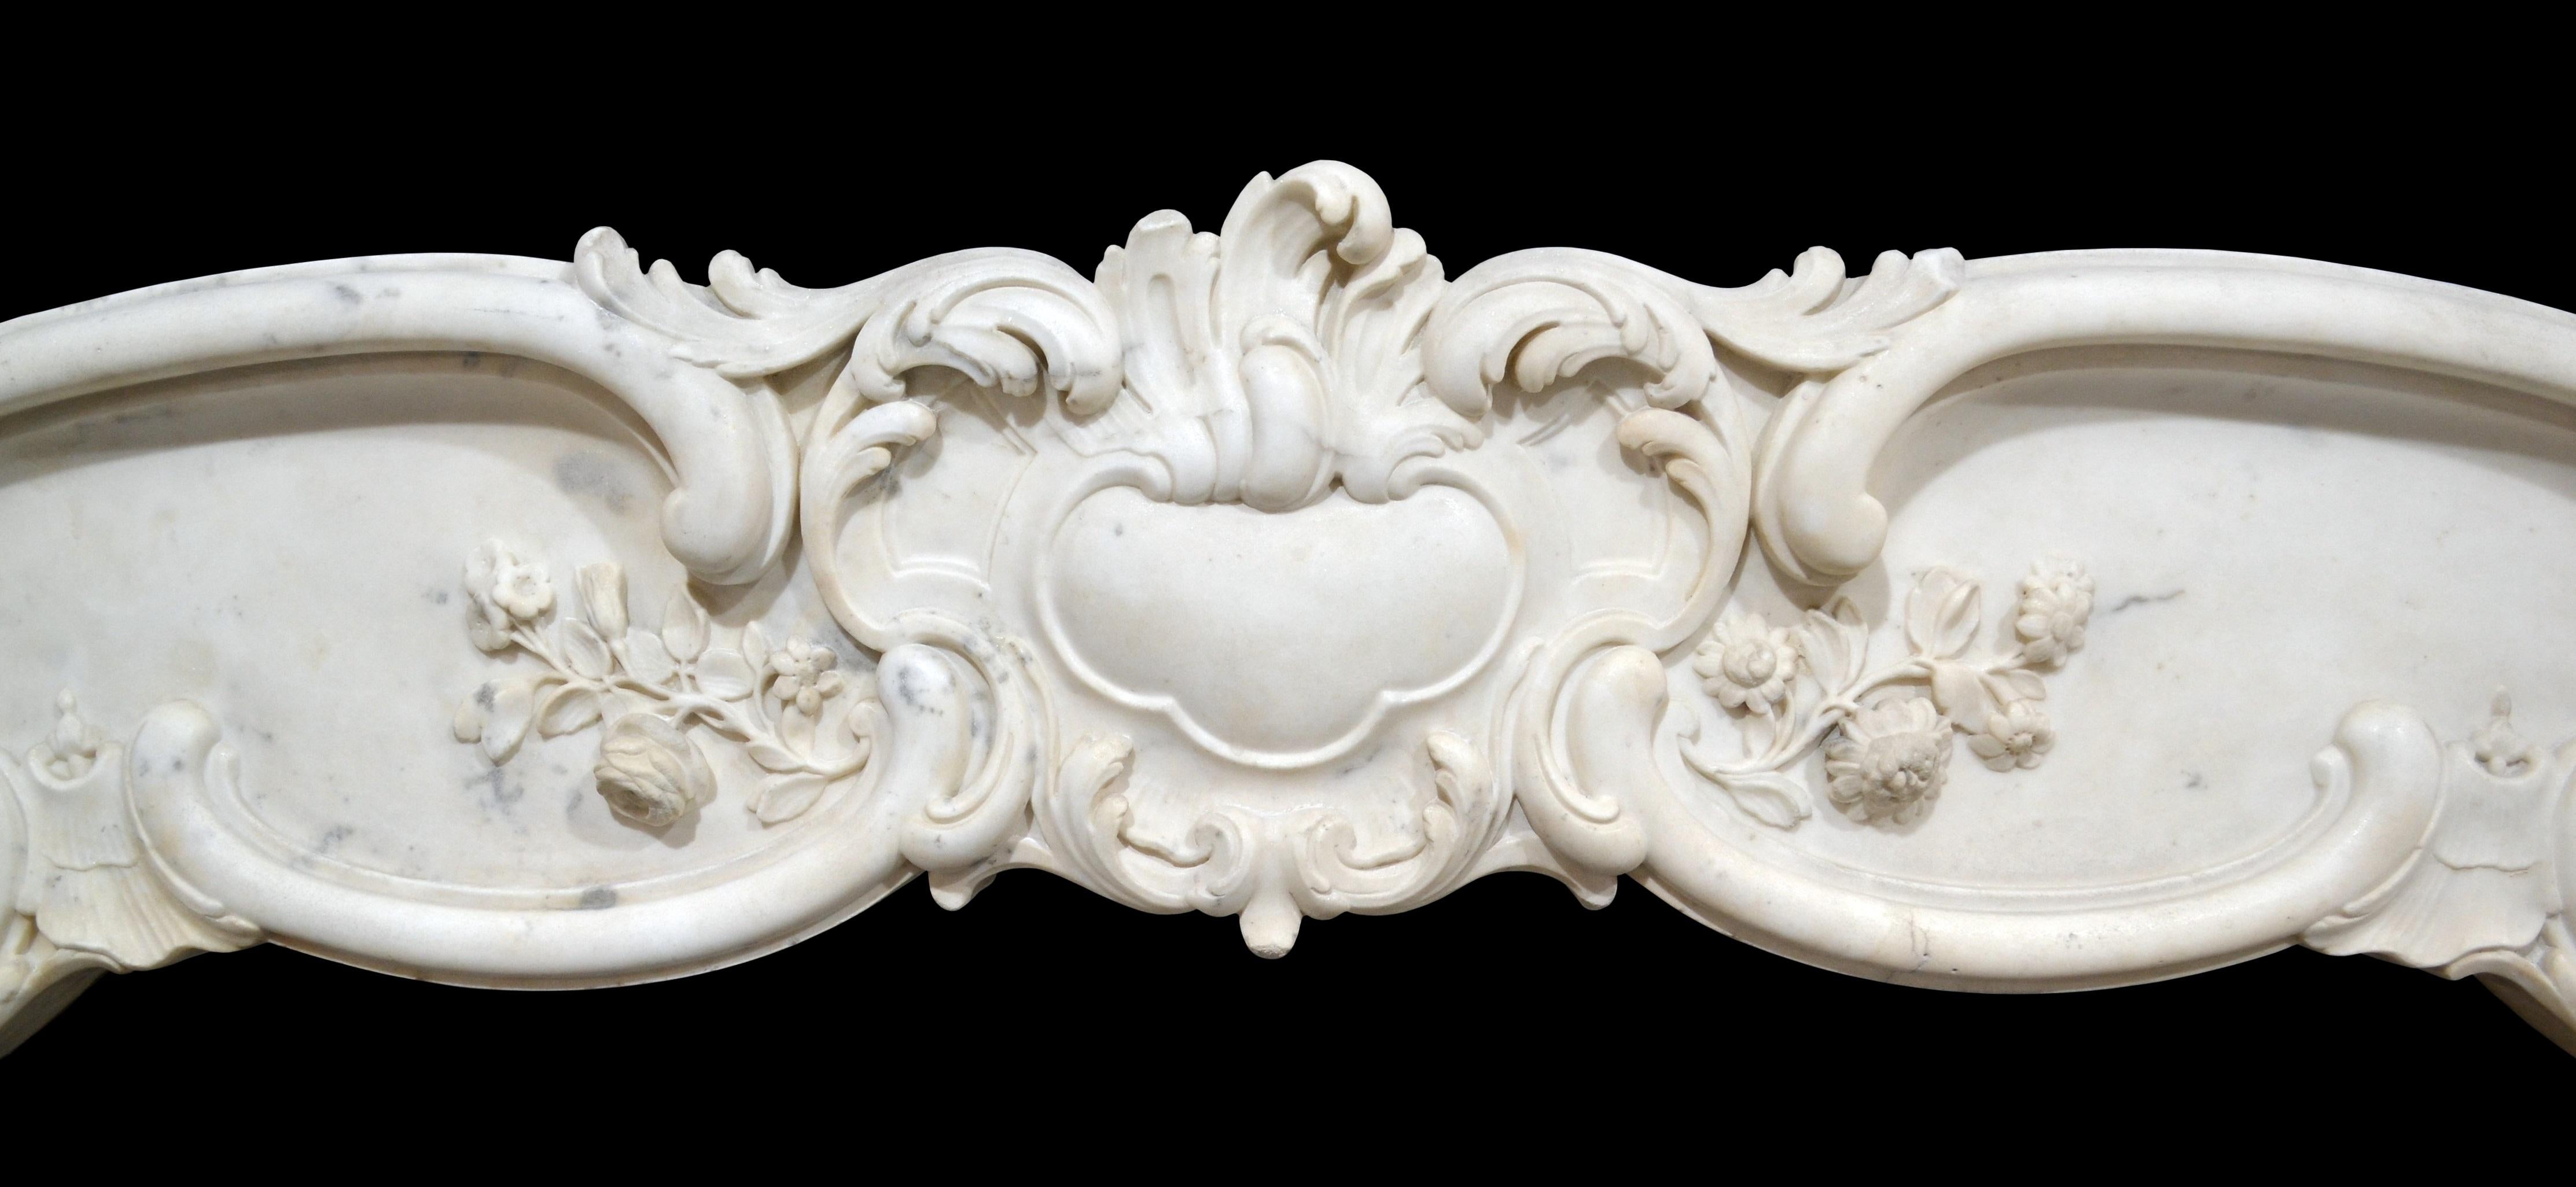 Carrara Marble Early 19th Century French Rococo Mantelpiece For Sale